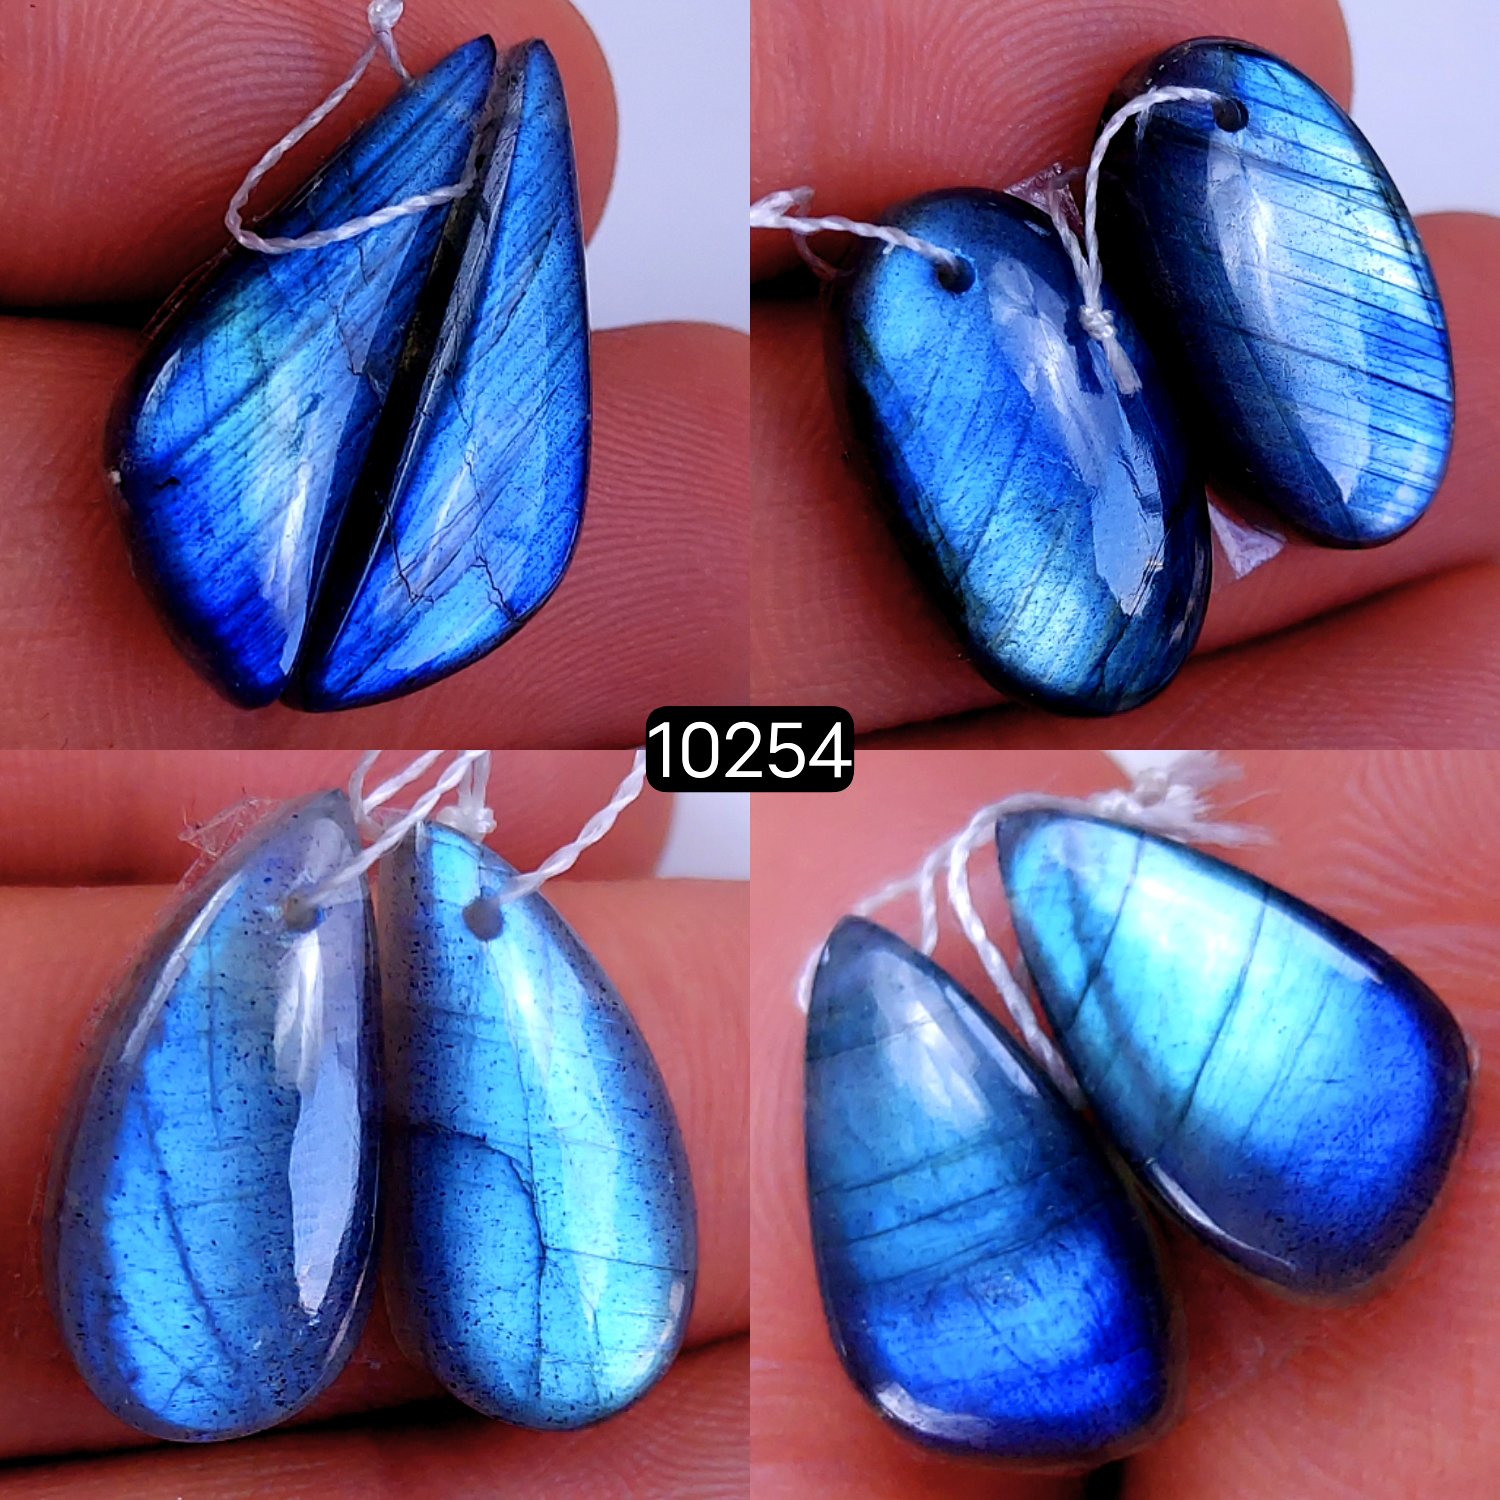 4Pair 70Cts Natural Labradorite Crystal Drill Dangle Drop Earring Pairs Silver Earrings Blue Labradorite Hoop Jewelry  20x10 16x9mm #10254